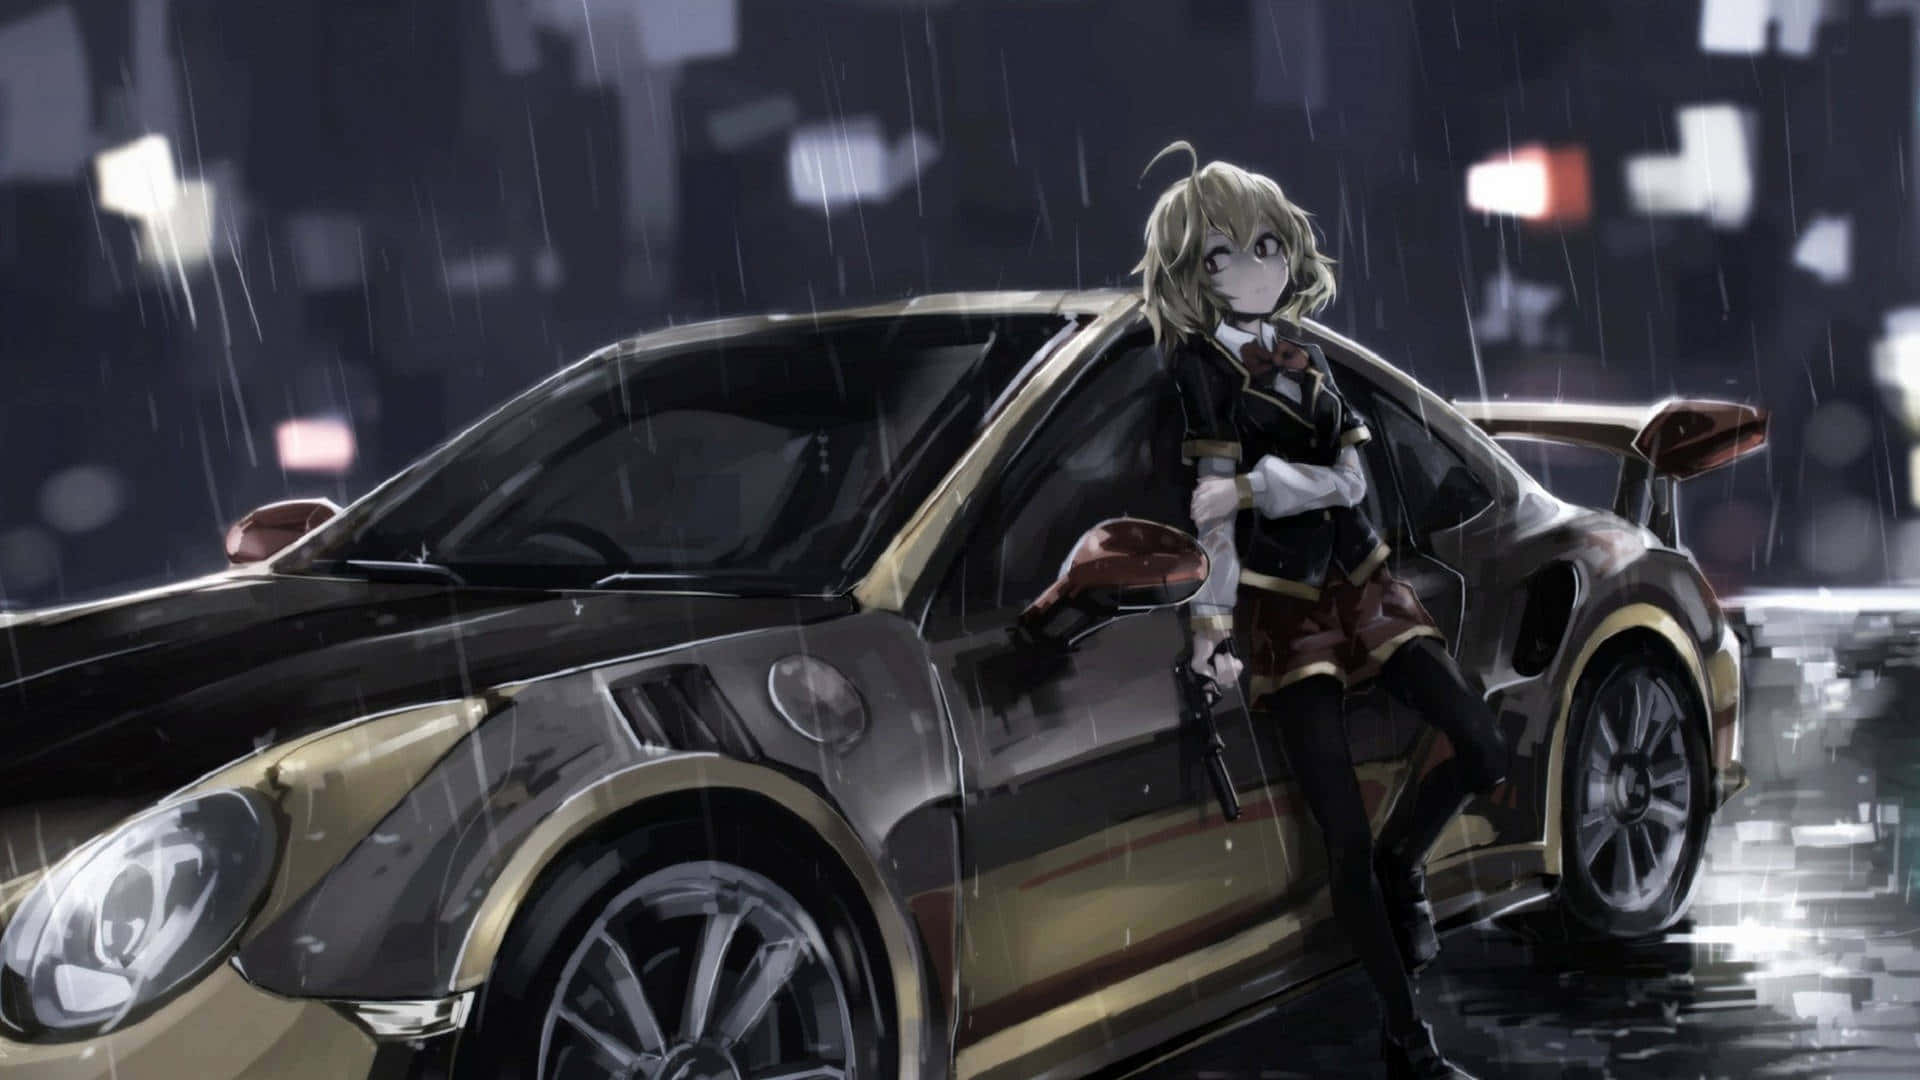 Top 10 Anime Cars List [Best Recommendations]